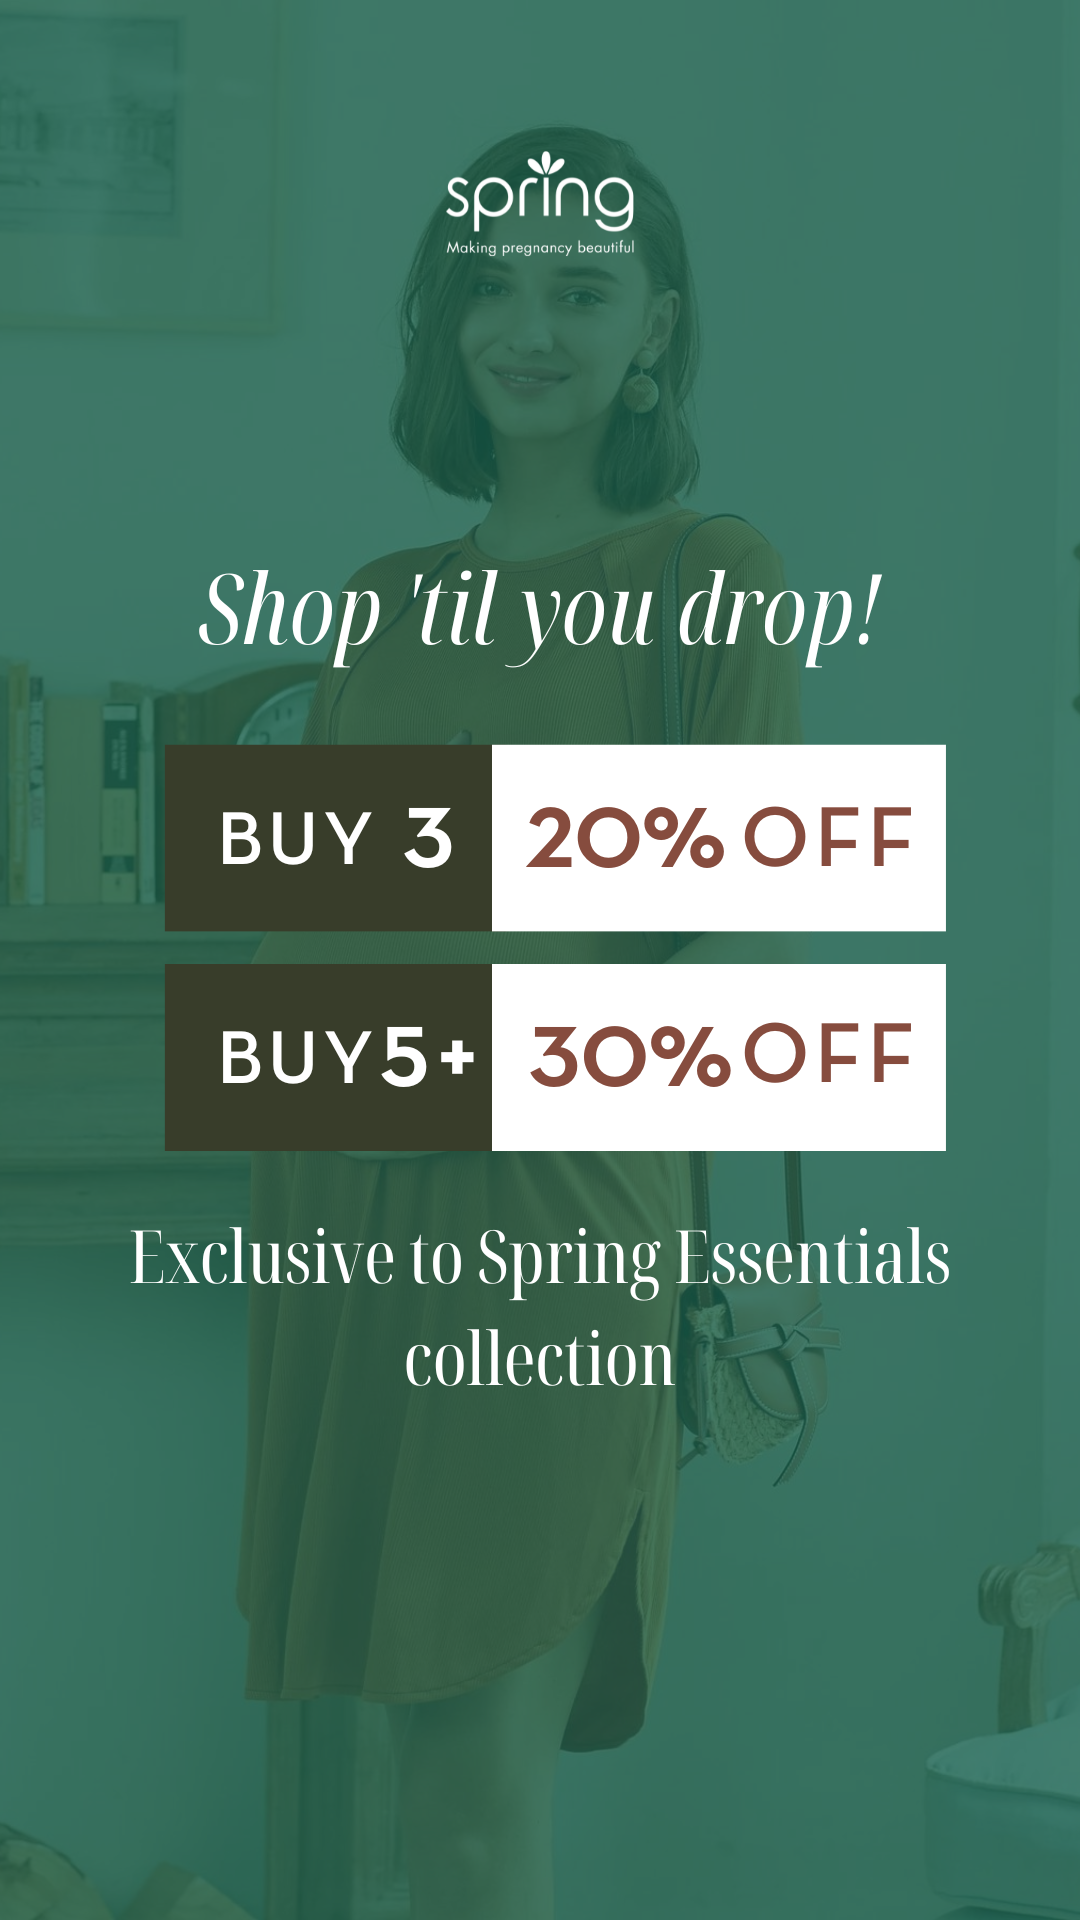 Spring Essentials: Save 20% on Any 3, Save 30% on Any 5+